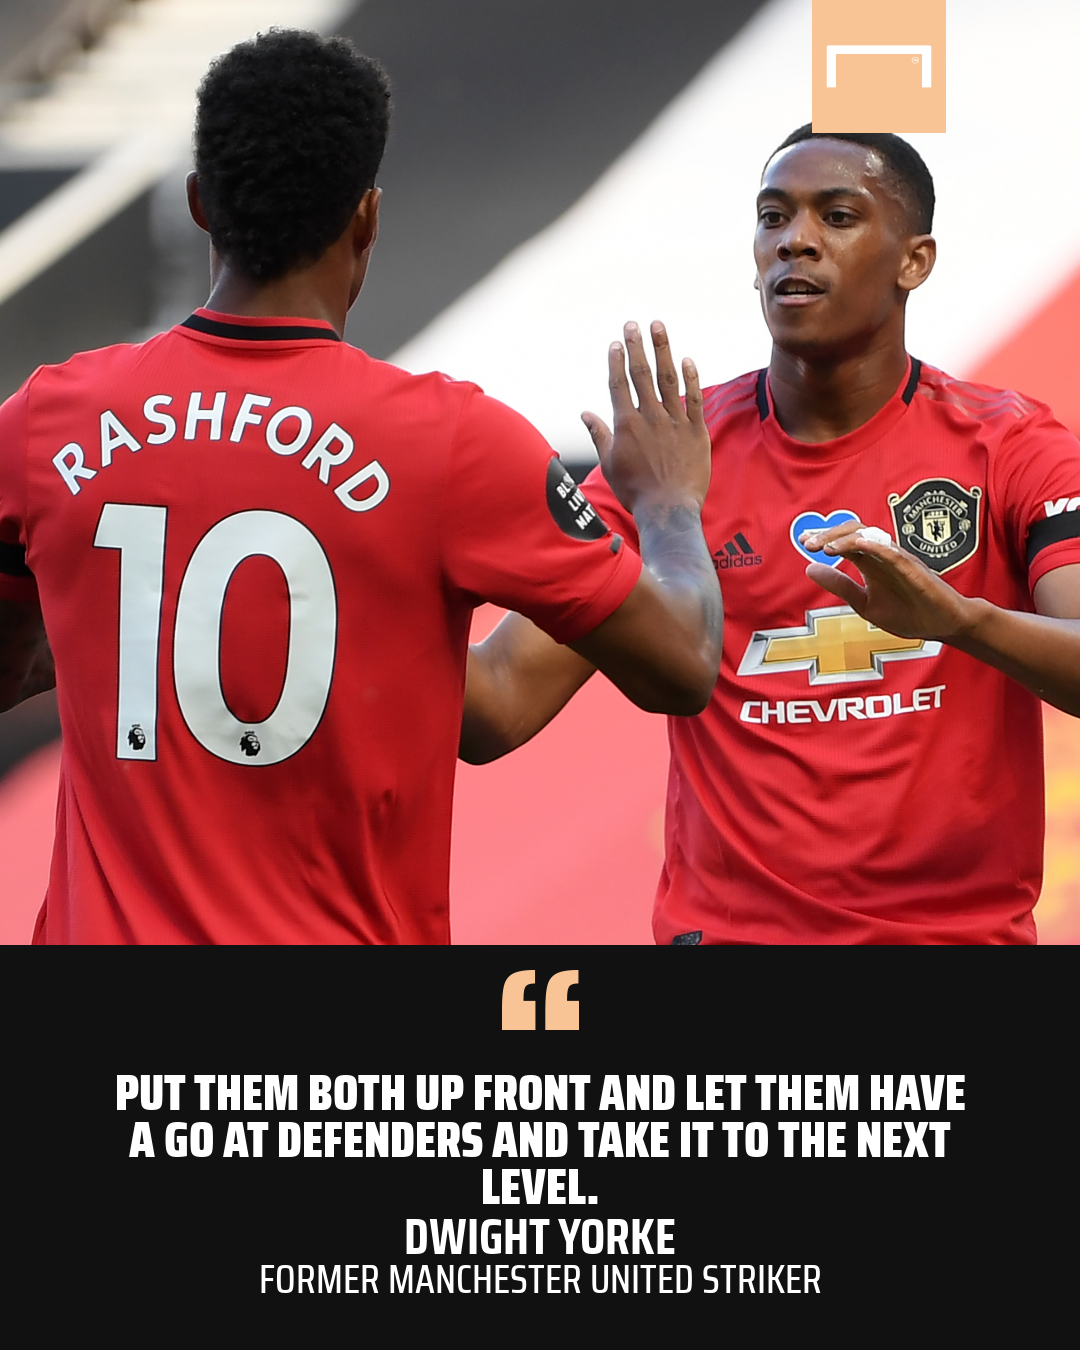 Man Utd should play Rashford and Martial up front together to 'take it to the next level', says Yorke